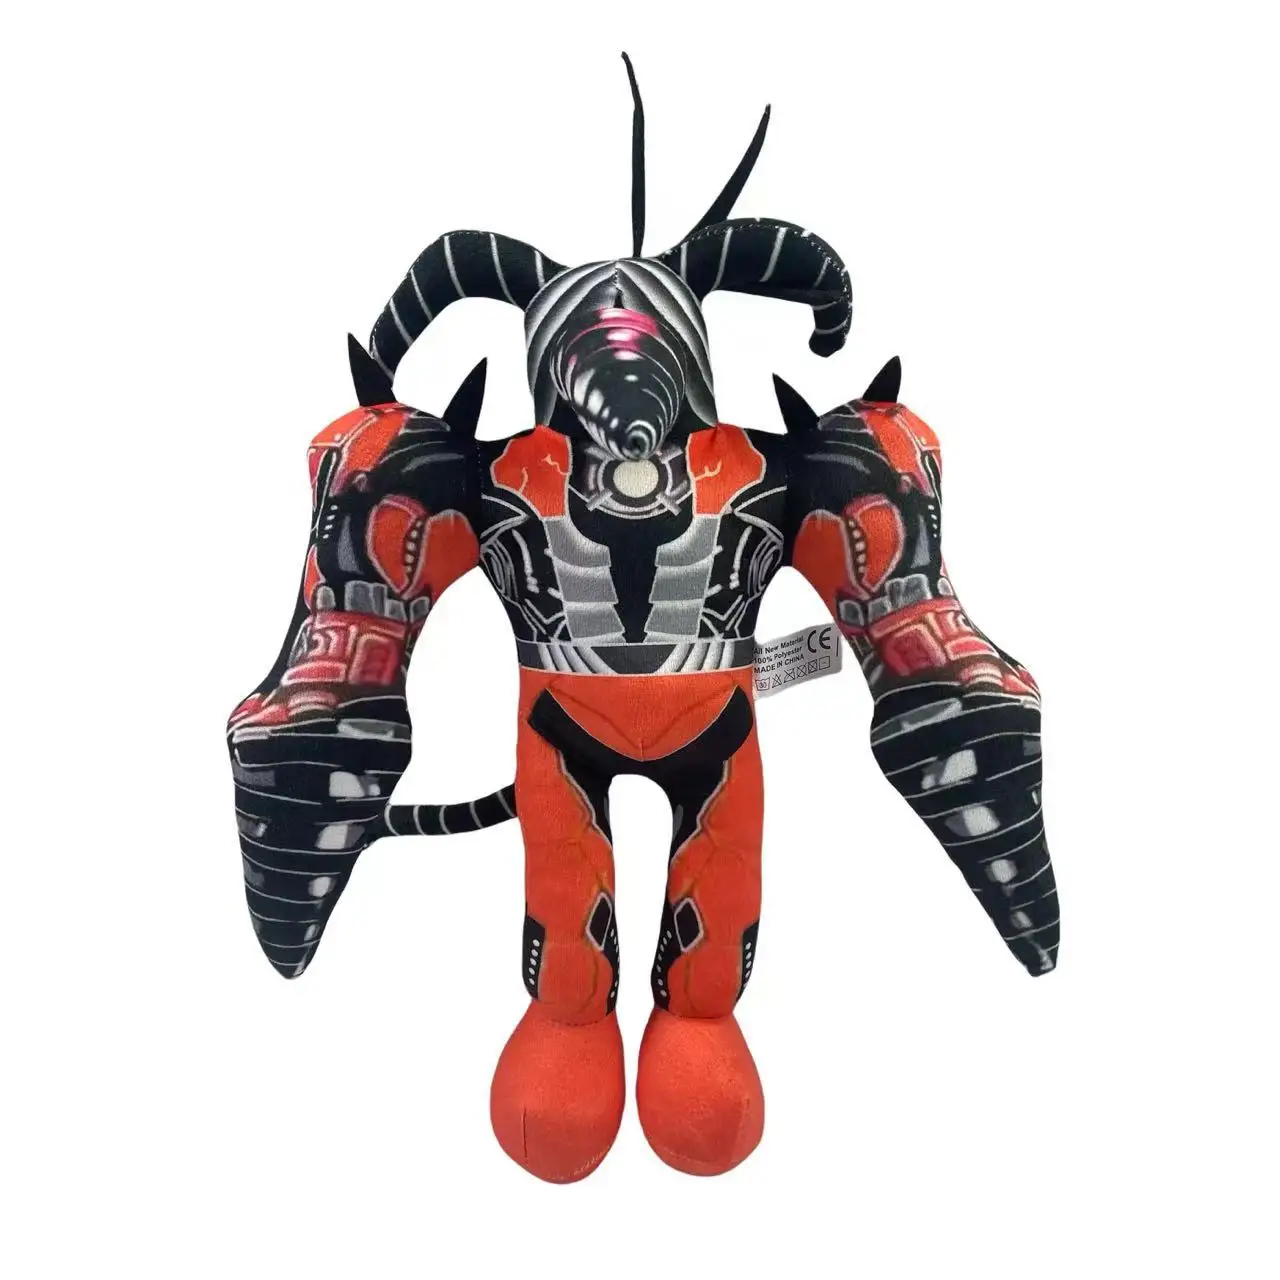 Cross-border New Skibidi Toilet Plush Toilet People Spoof Plush Toy Bull Devil Electric Drill Doll cross border toilet people monitor people s toys skibidi toilet plush toys doll novelty toys holiday gifts parent child gifts